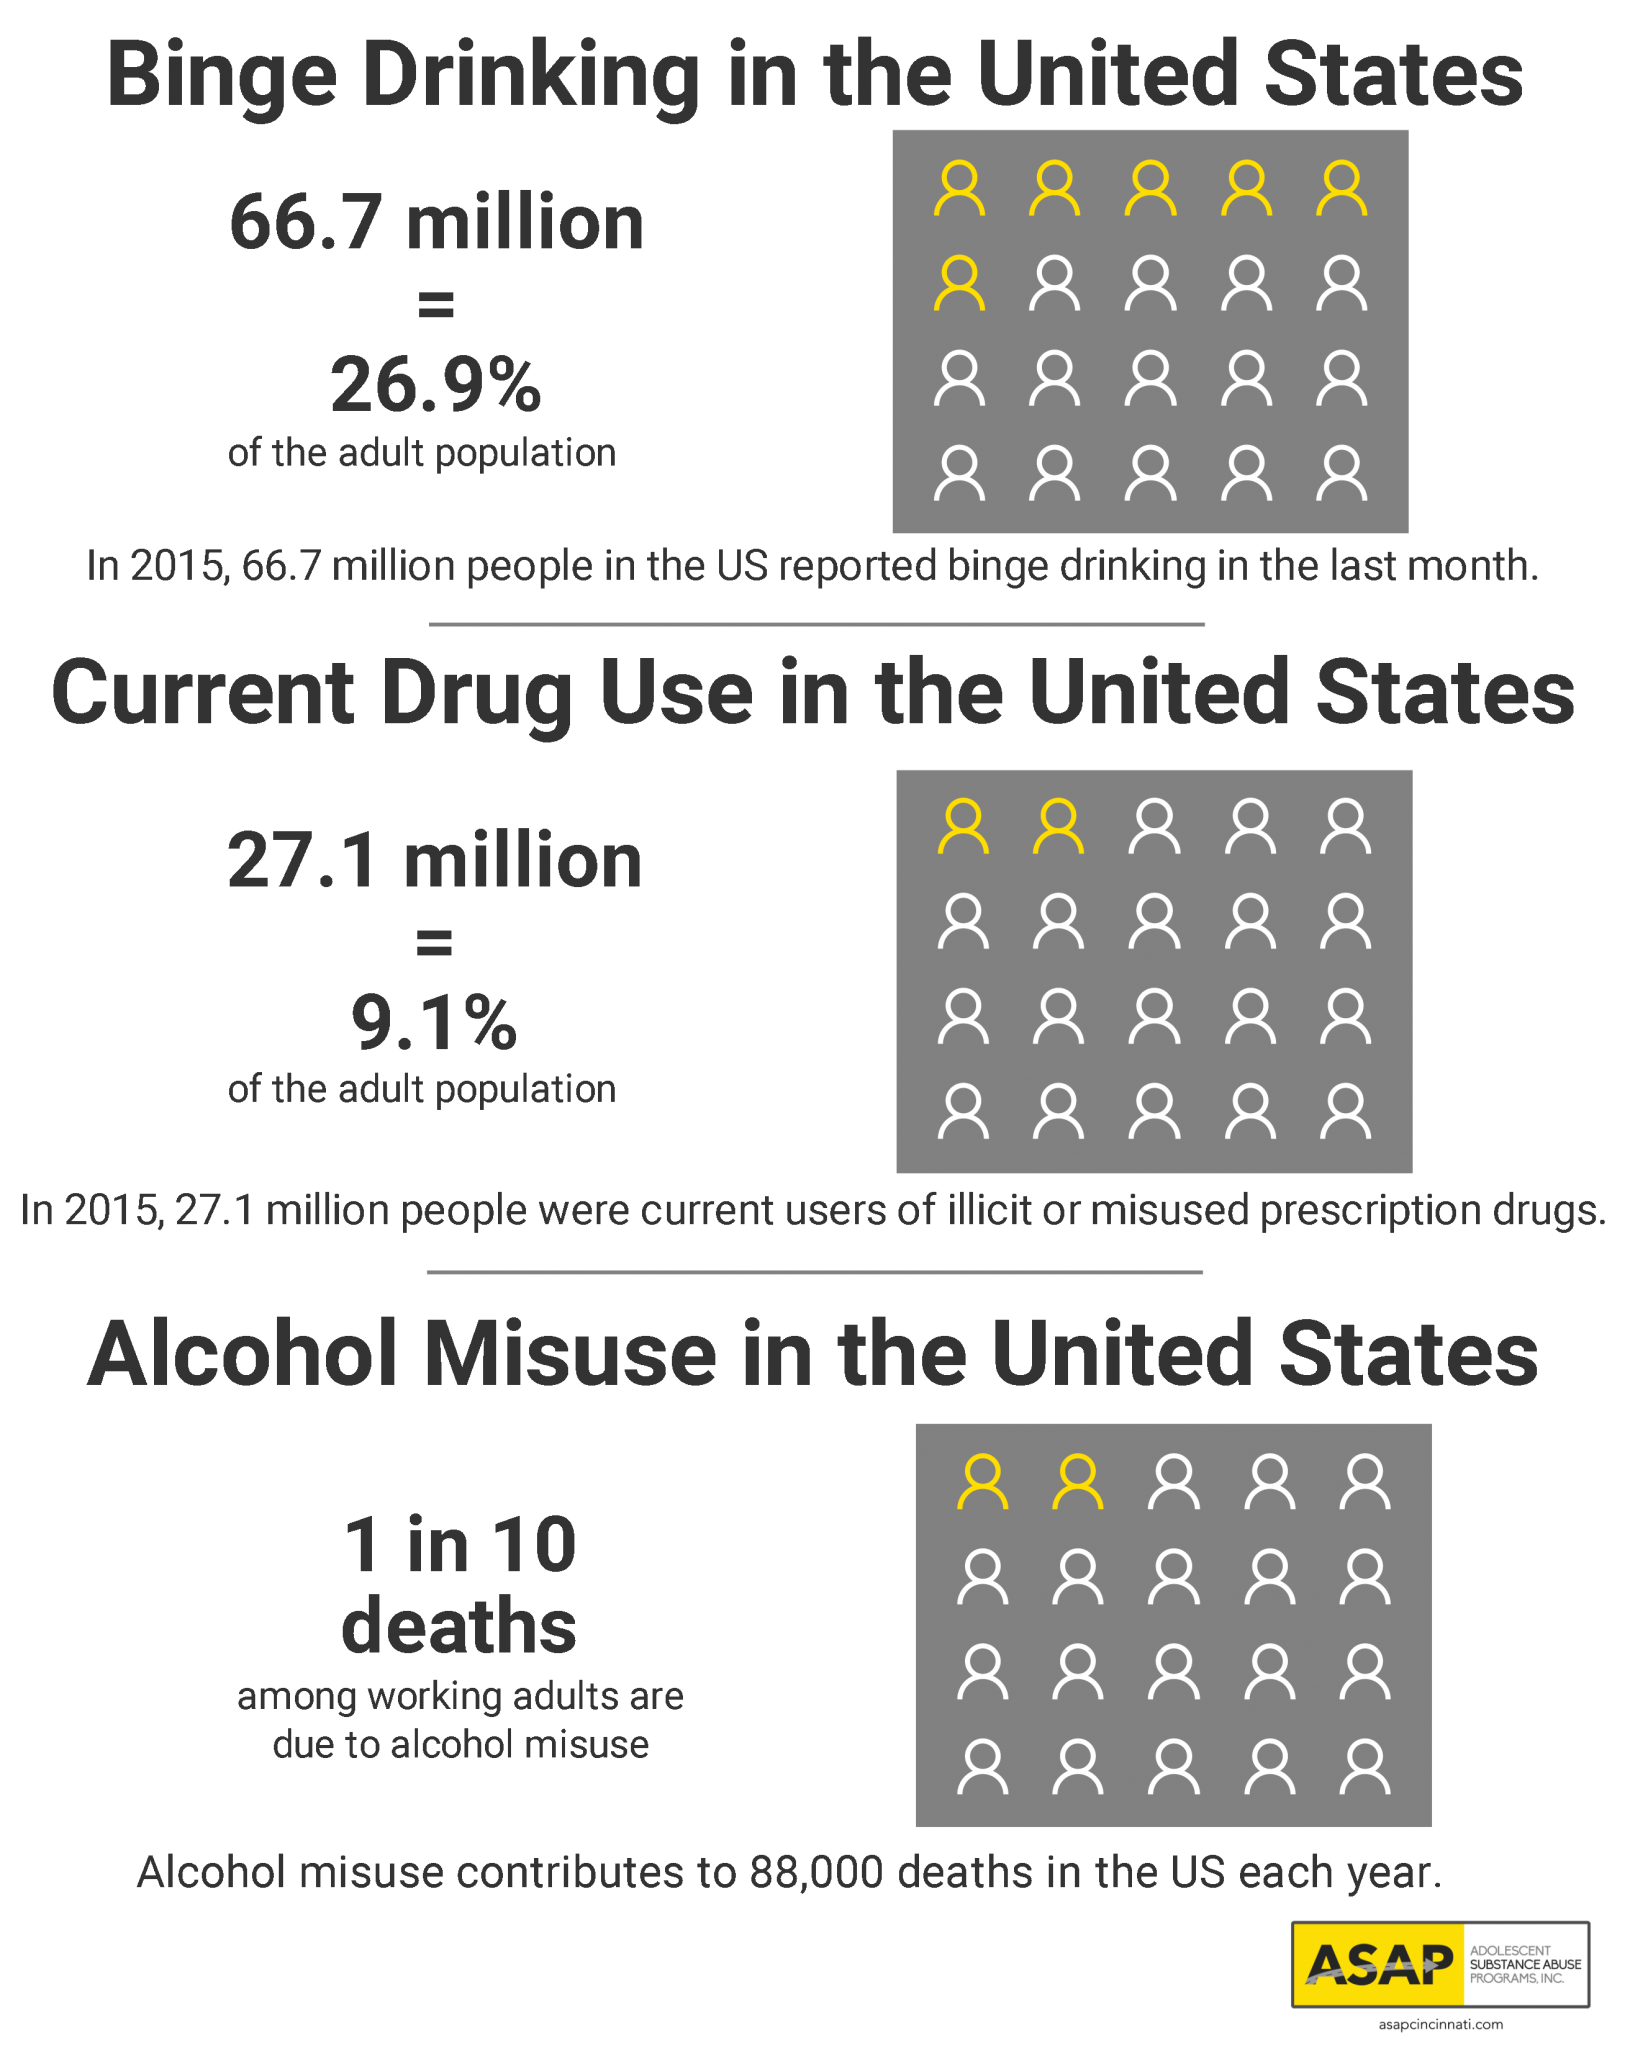 Substance Misuse: In 2015, 66.7 million people in the United States reported binge drinking in the last month. In 2015, 27.1 million people were current users of illicit or misused prescription drugs. 1 in 10 deaths among working adults is due to alcohol misuse.